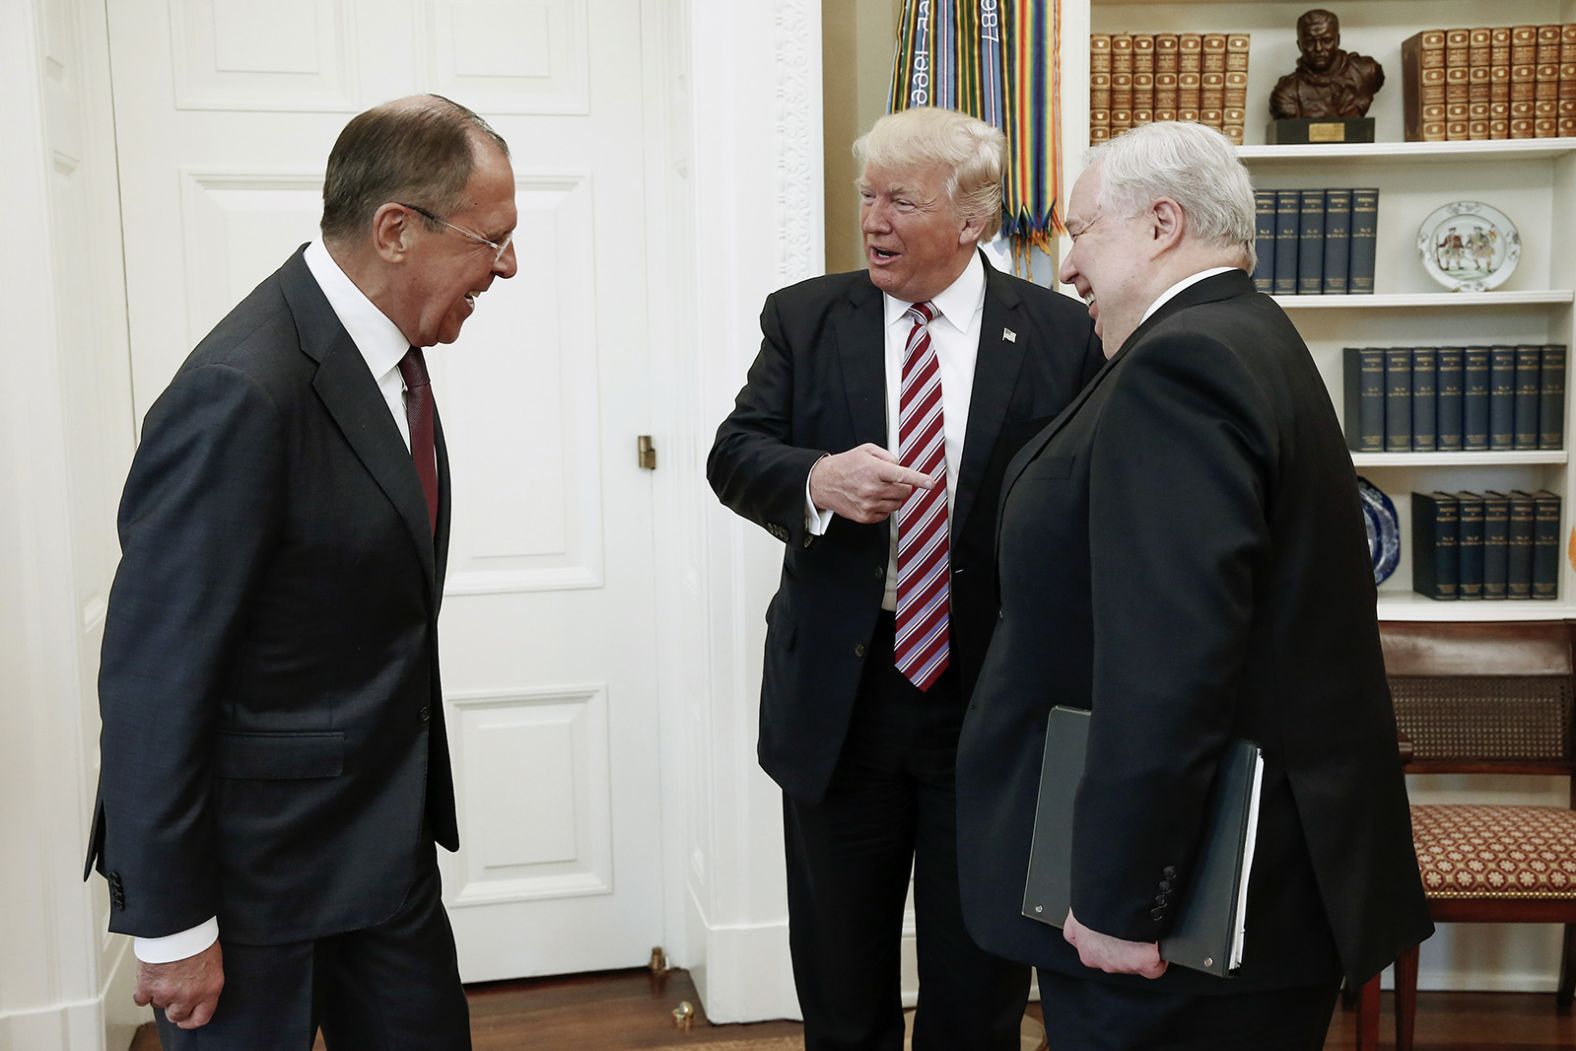 Trump points at Sergey Kislyak, Russia's ambassador to the United States, while hosting Kislyak and Russian Foreign Minister Sergey Lavrov, left, at the White House in May 2017. <a href="index.php?page=&url=http%3A%2F%2Fwww.cnn.com%2F2017%2F05%2F10%2Fpolitics%2Ftrump-lavrov-tillerson-meeting%2Findex.html" target="_blank">The meeting with Lavrov</a> was the highest-level encounter between the US administration and Moscow since Trump's inauguration.